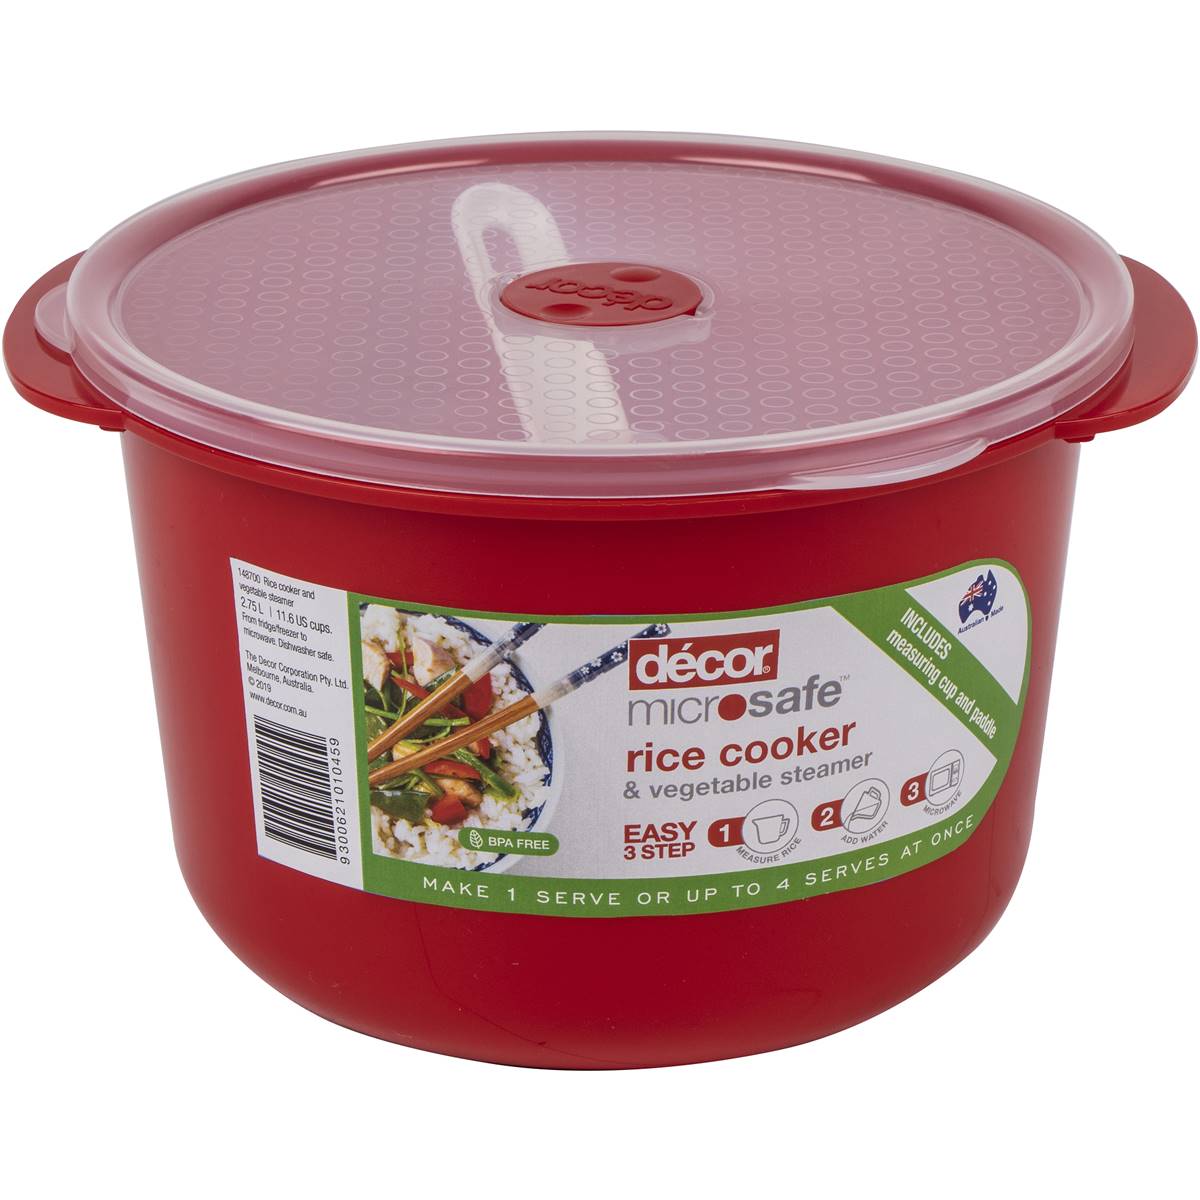 decor microsafe rice cooker instructions